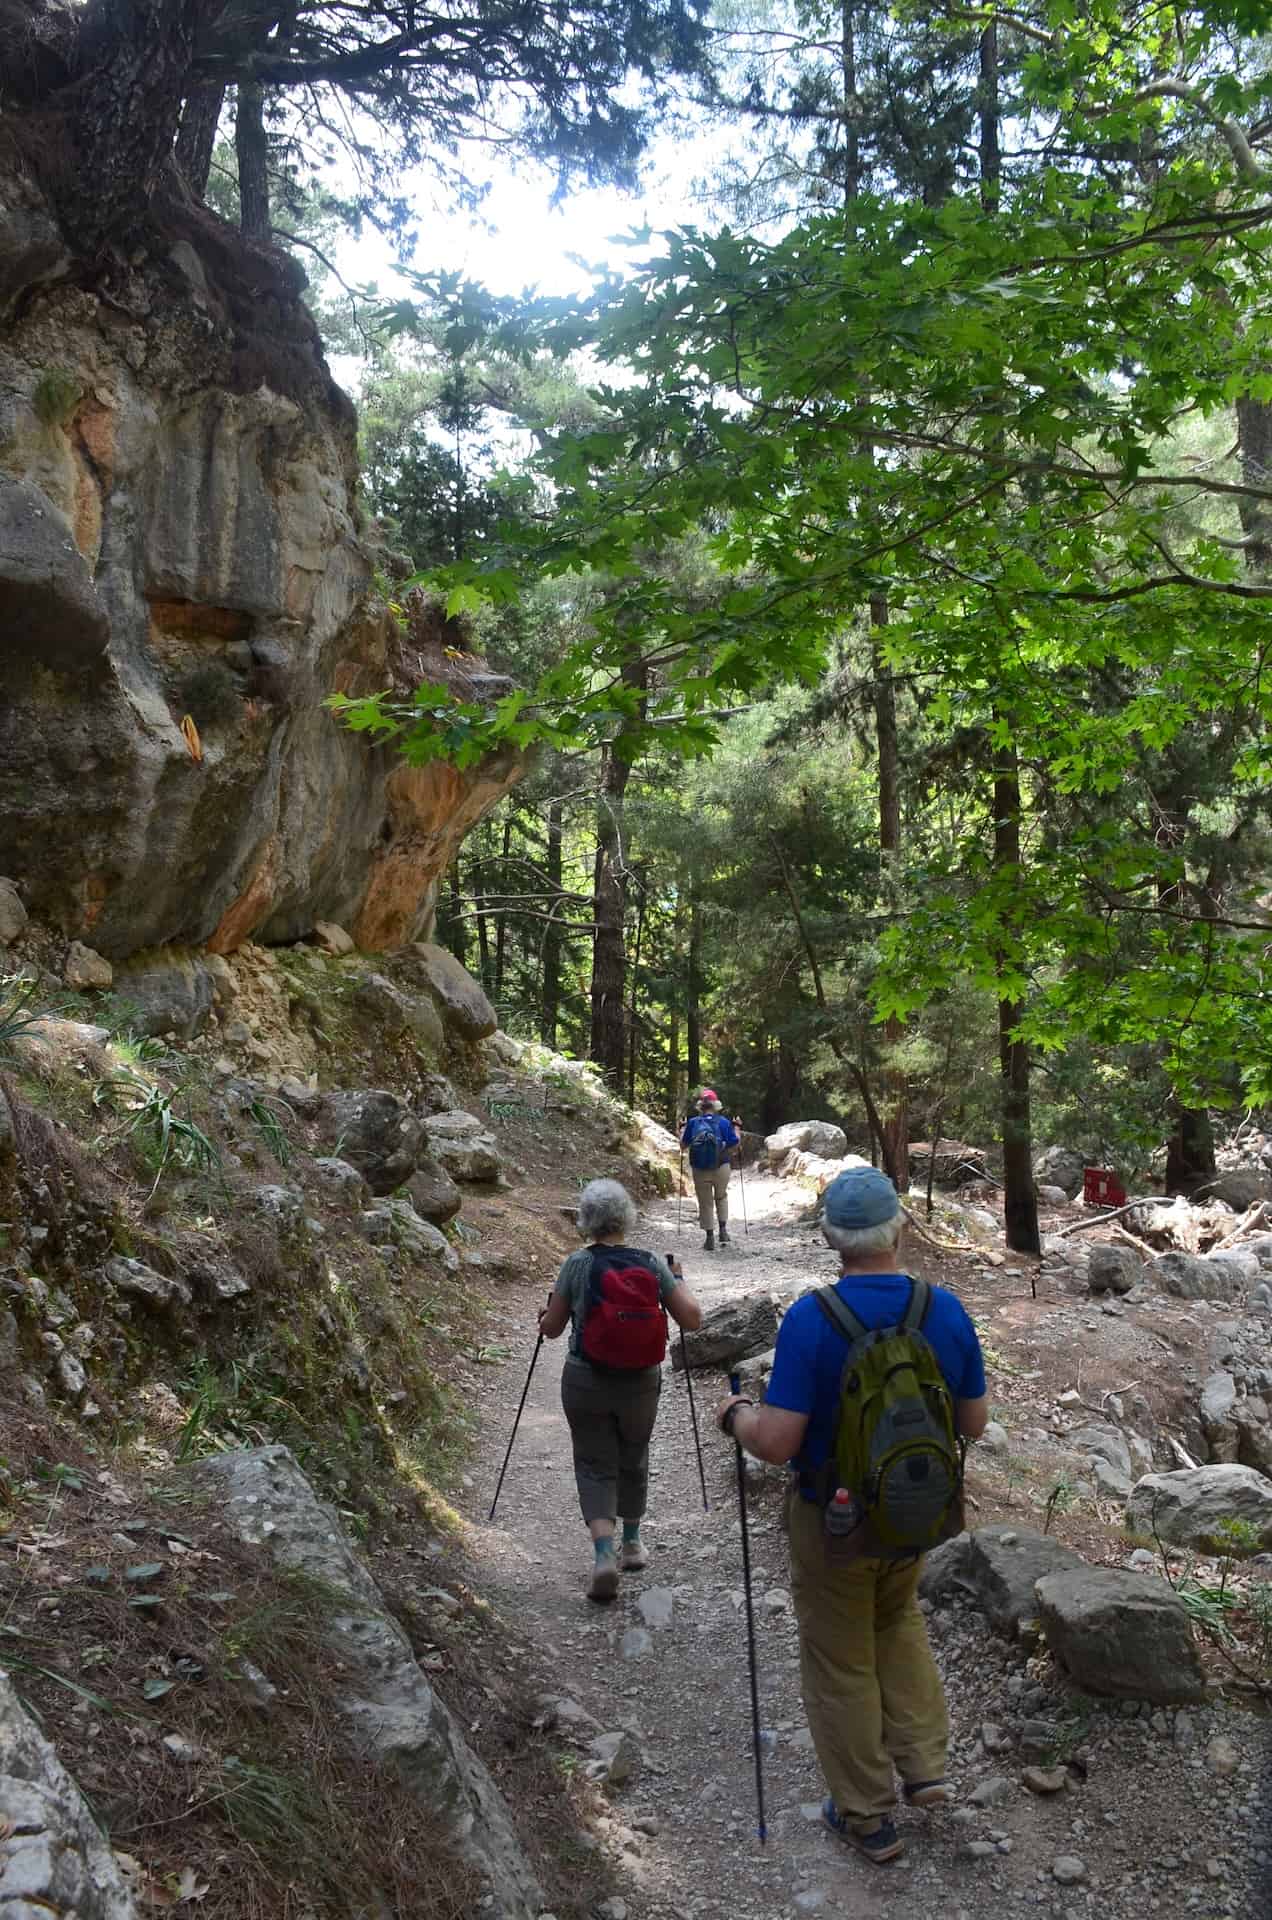 Getting closer to Vrysi at the Samaria Gorge in Crete, Greece